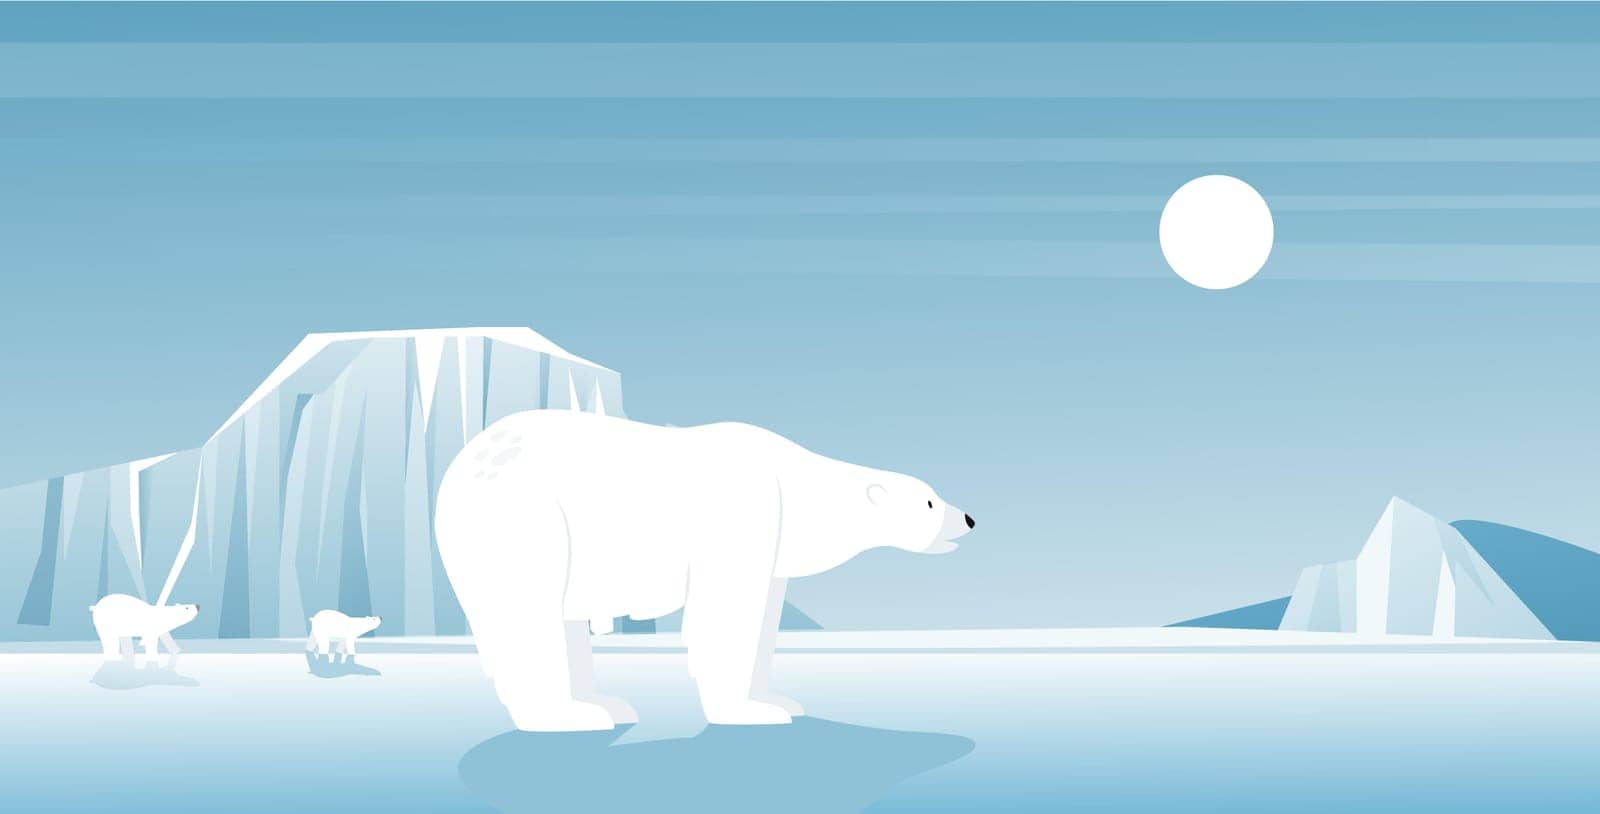 Polar bear in ice arctic or antarctic landscape, north winter scene vector illustration. Cartoon cute frost icy scenery with white polar bears and glacier, wild animals in cold climate background